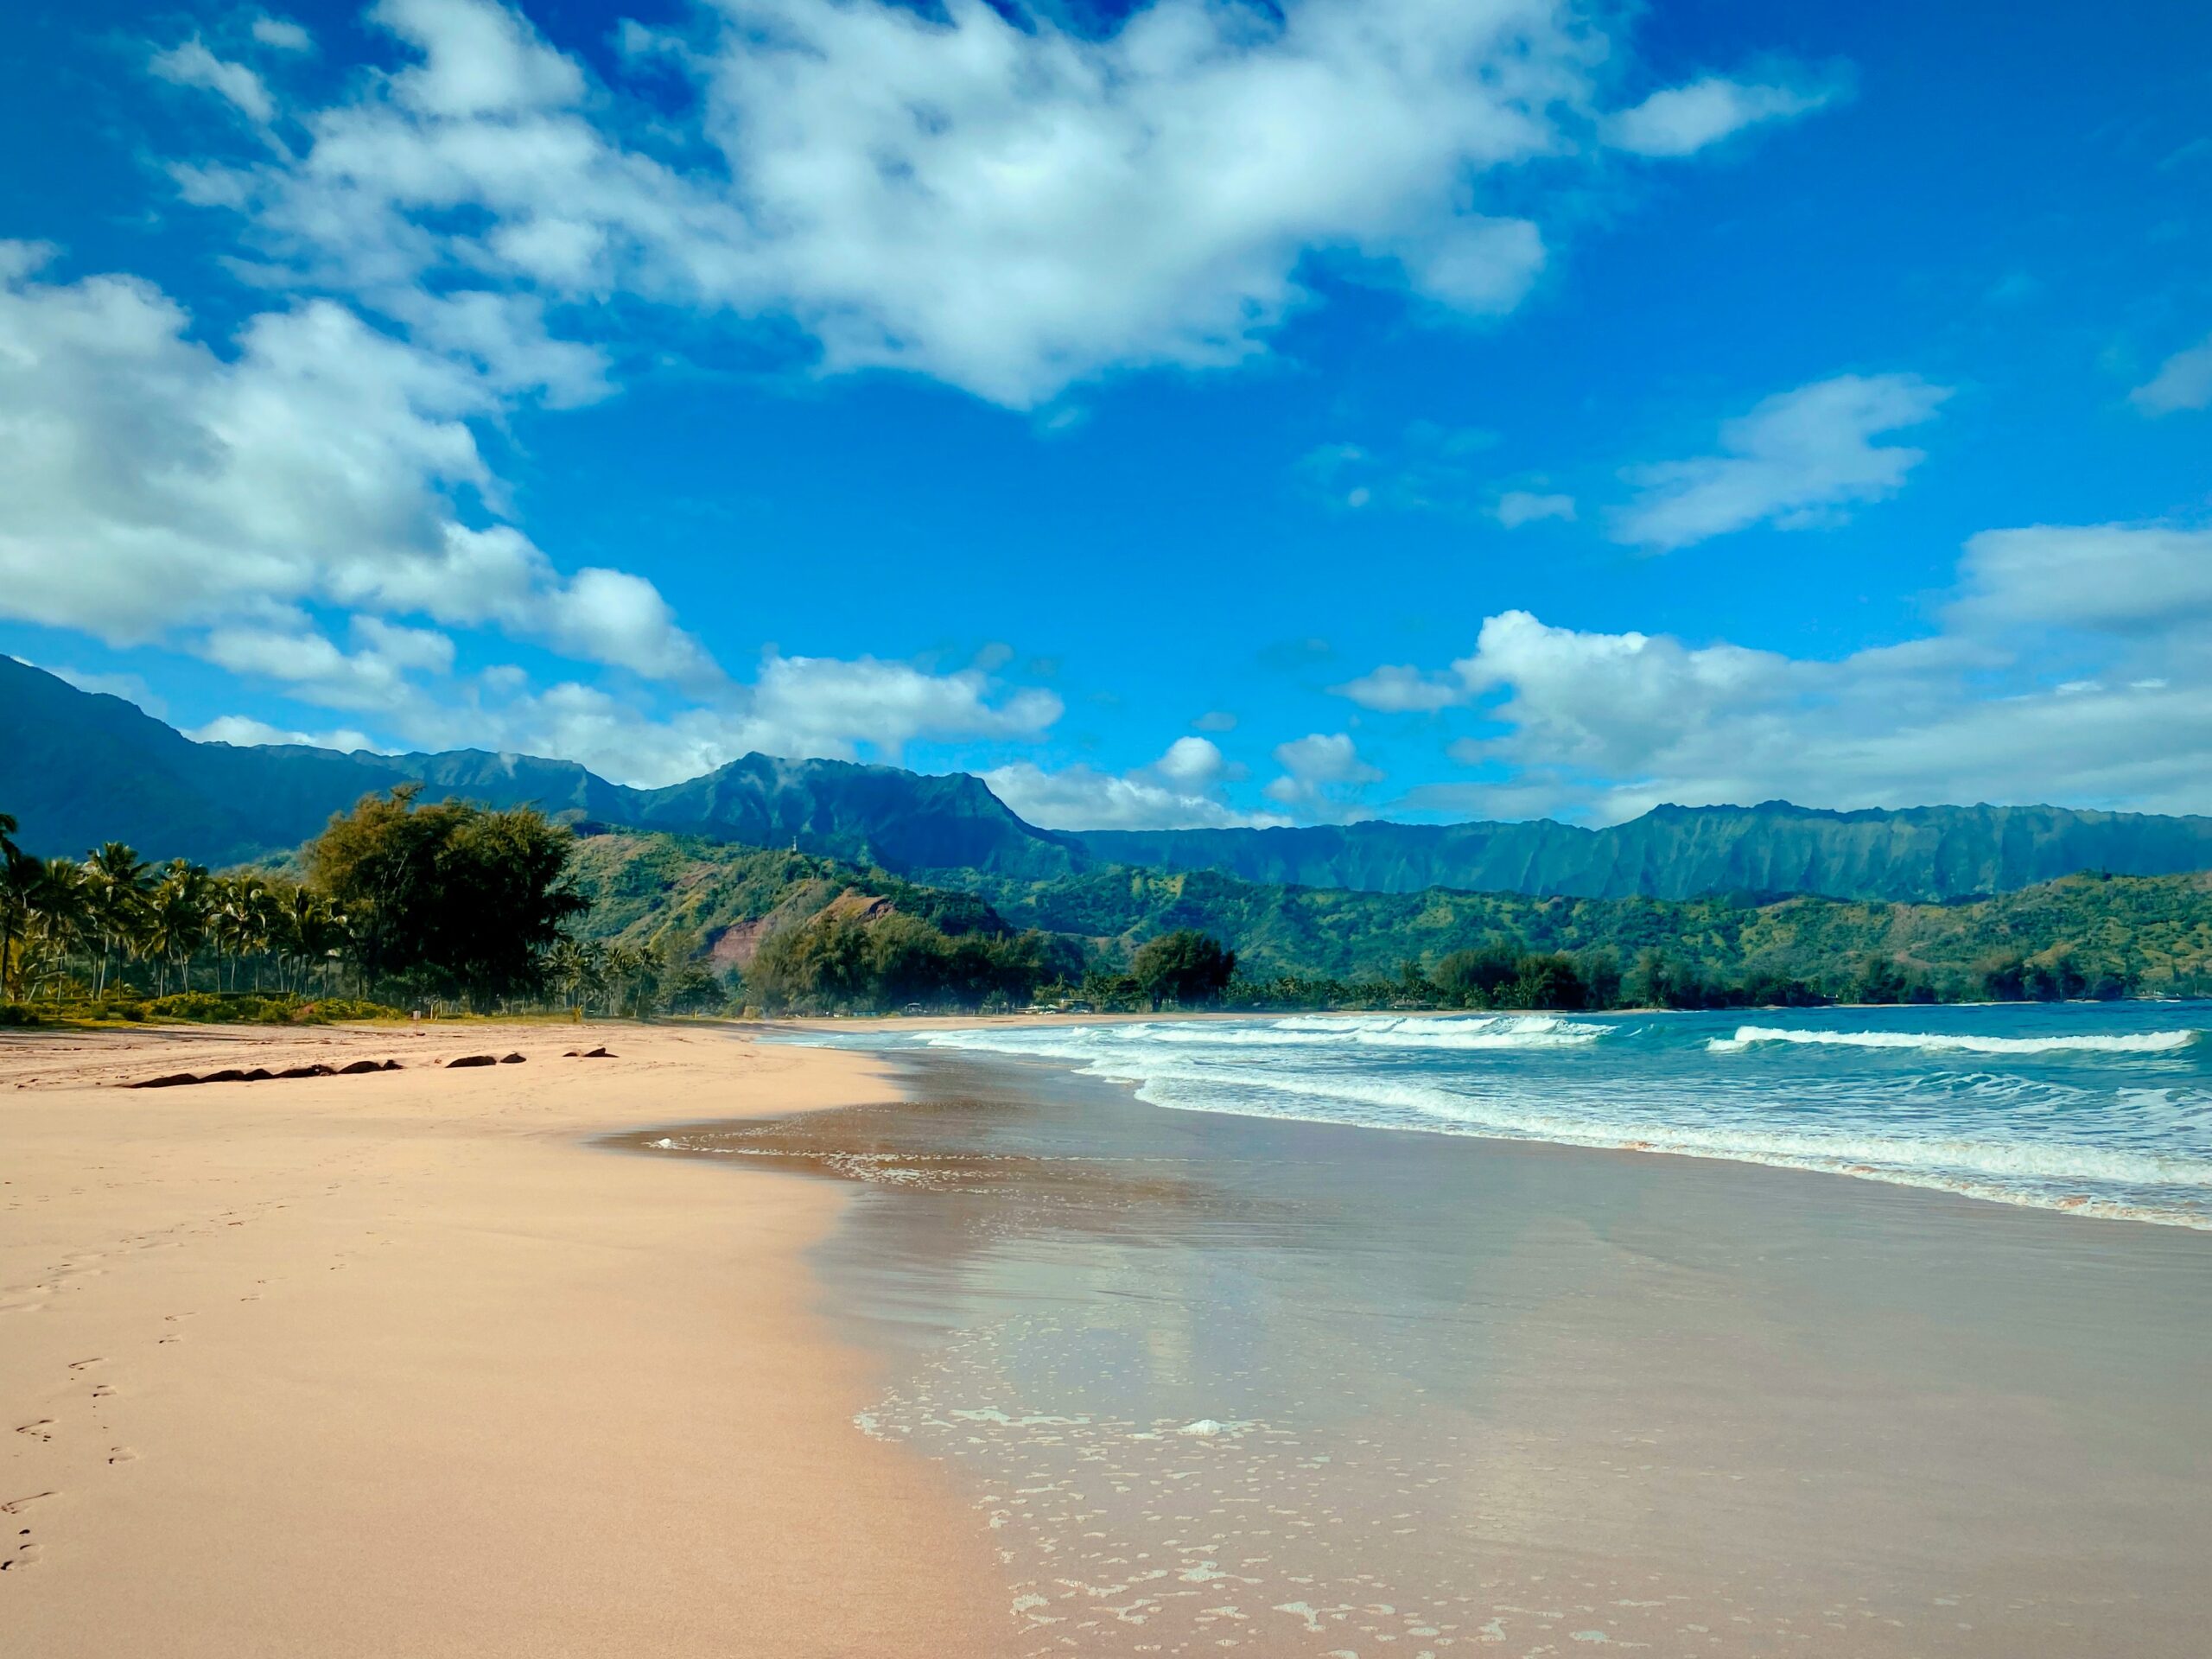 How To Book A Helicopter Ride On Kauai